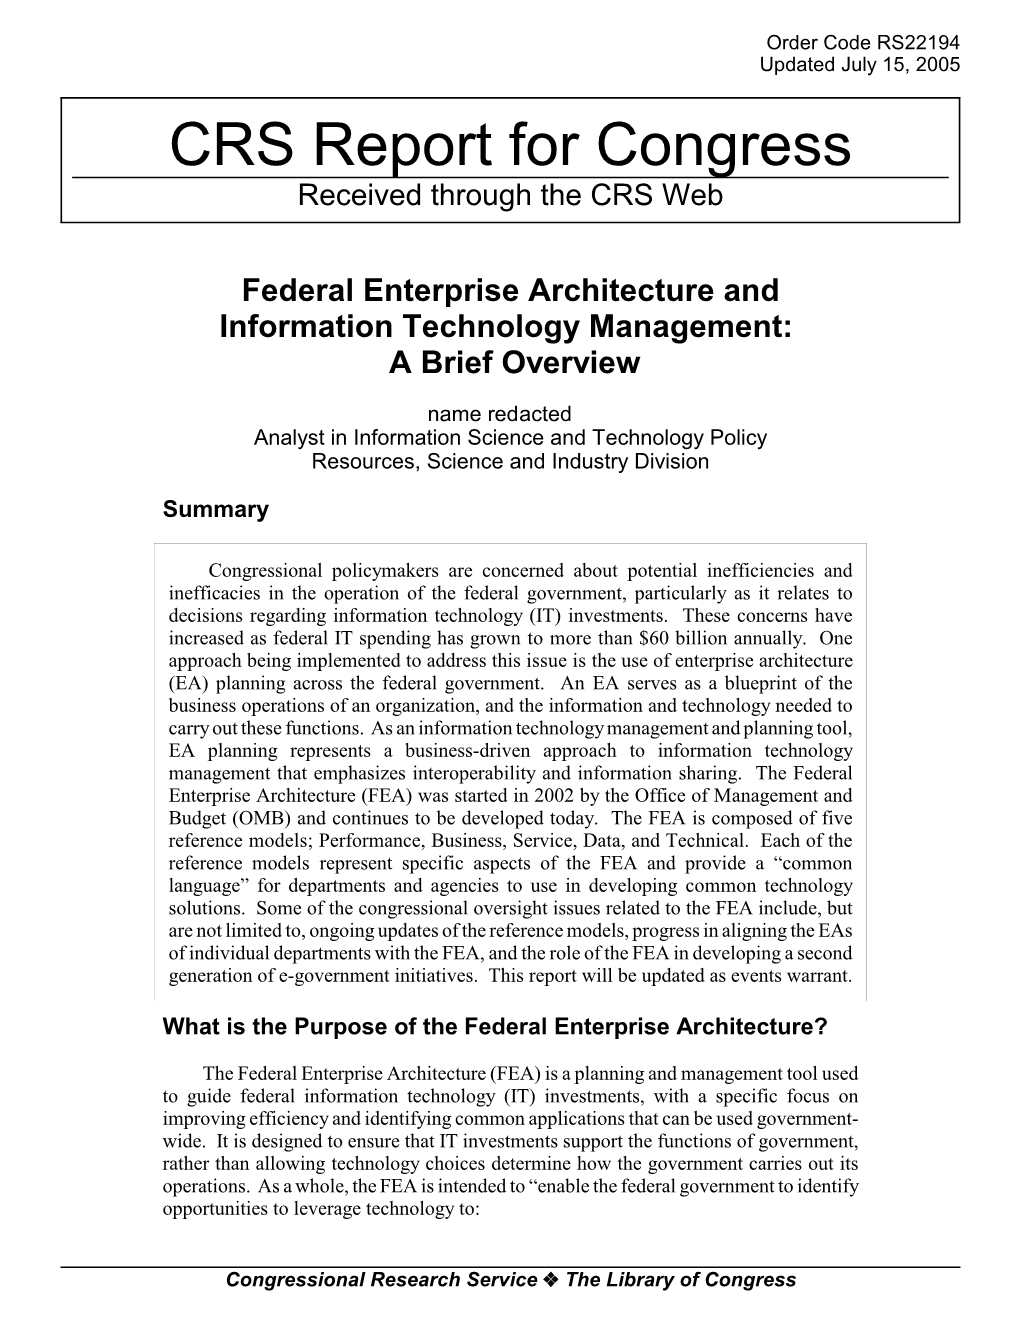 Federal Enterprise Architecture and Information Technology Management: a Brief Overview